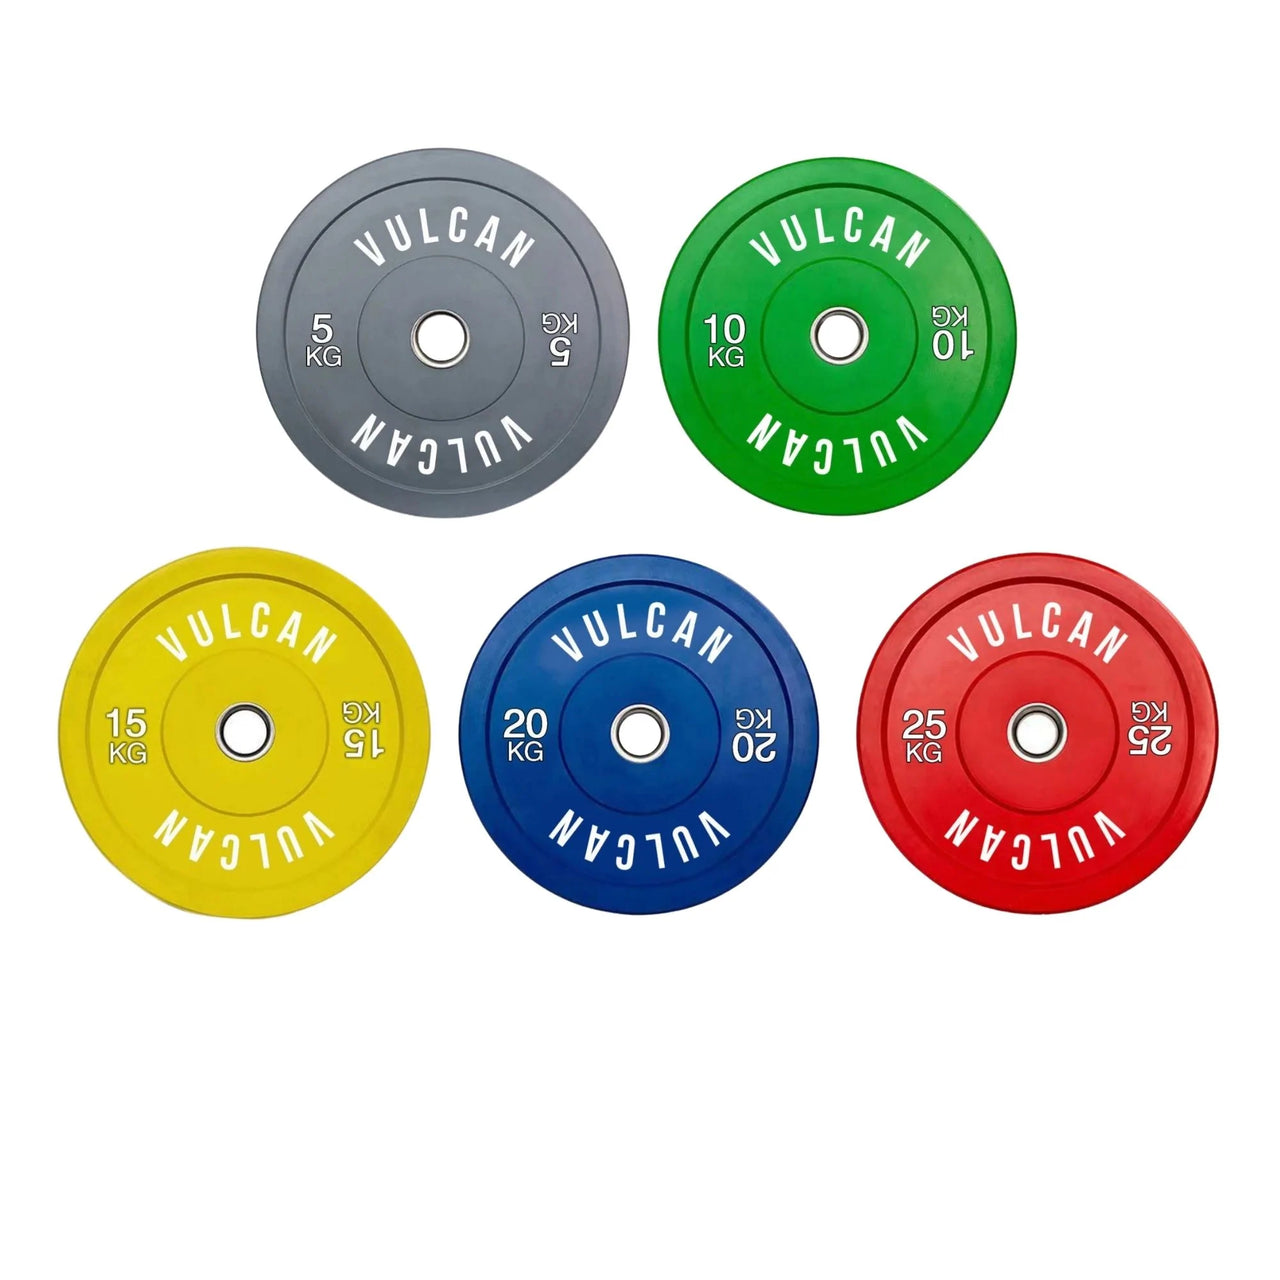 VULCAN Olympic Colour Bumper Plates (150KG SET) | PRE-ORDER MID-LATE FEBRUARY